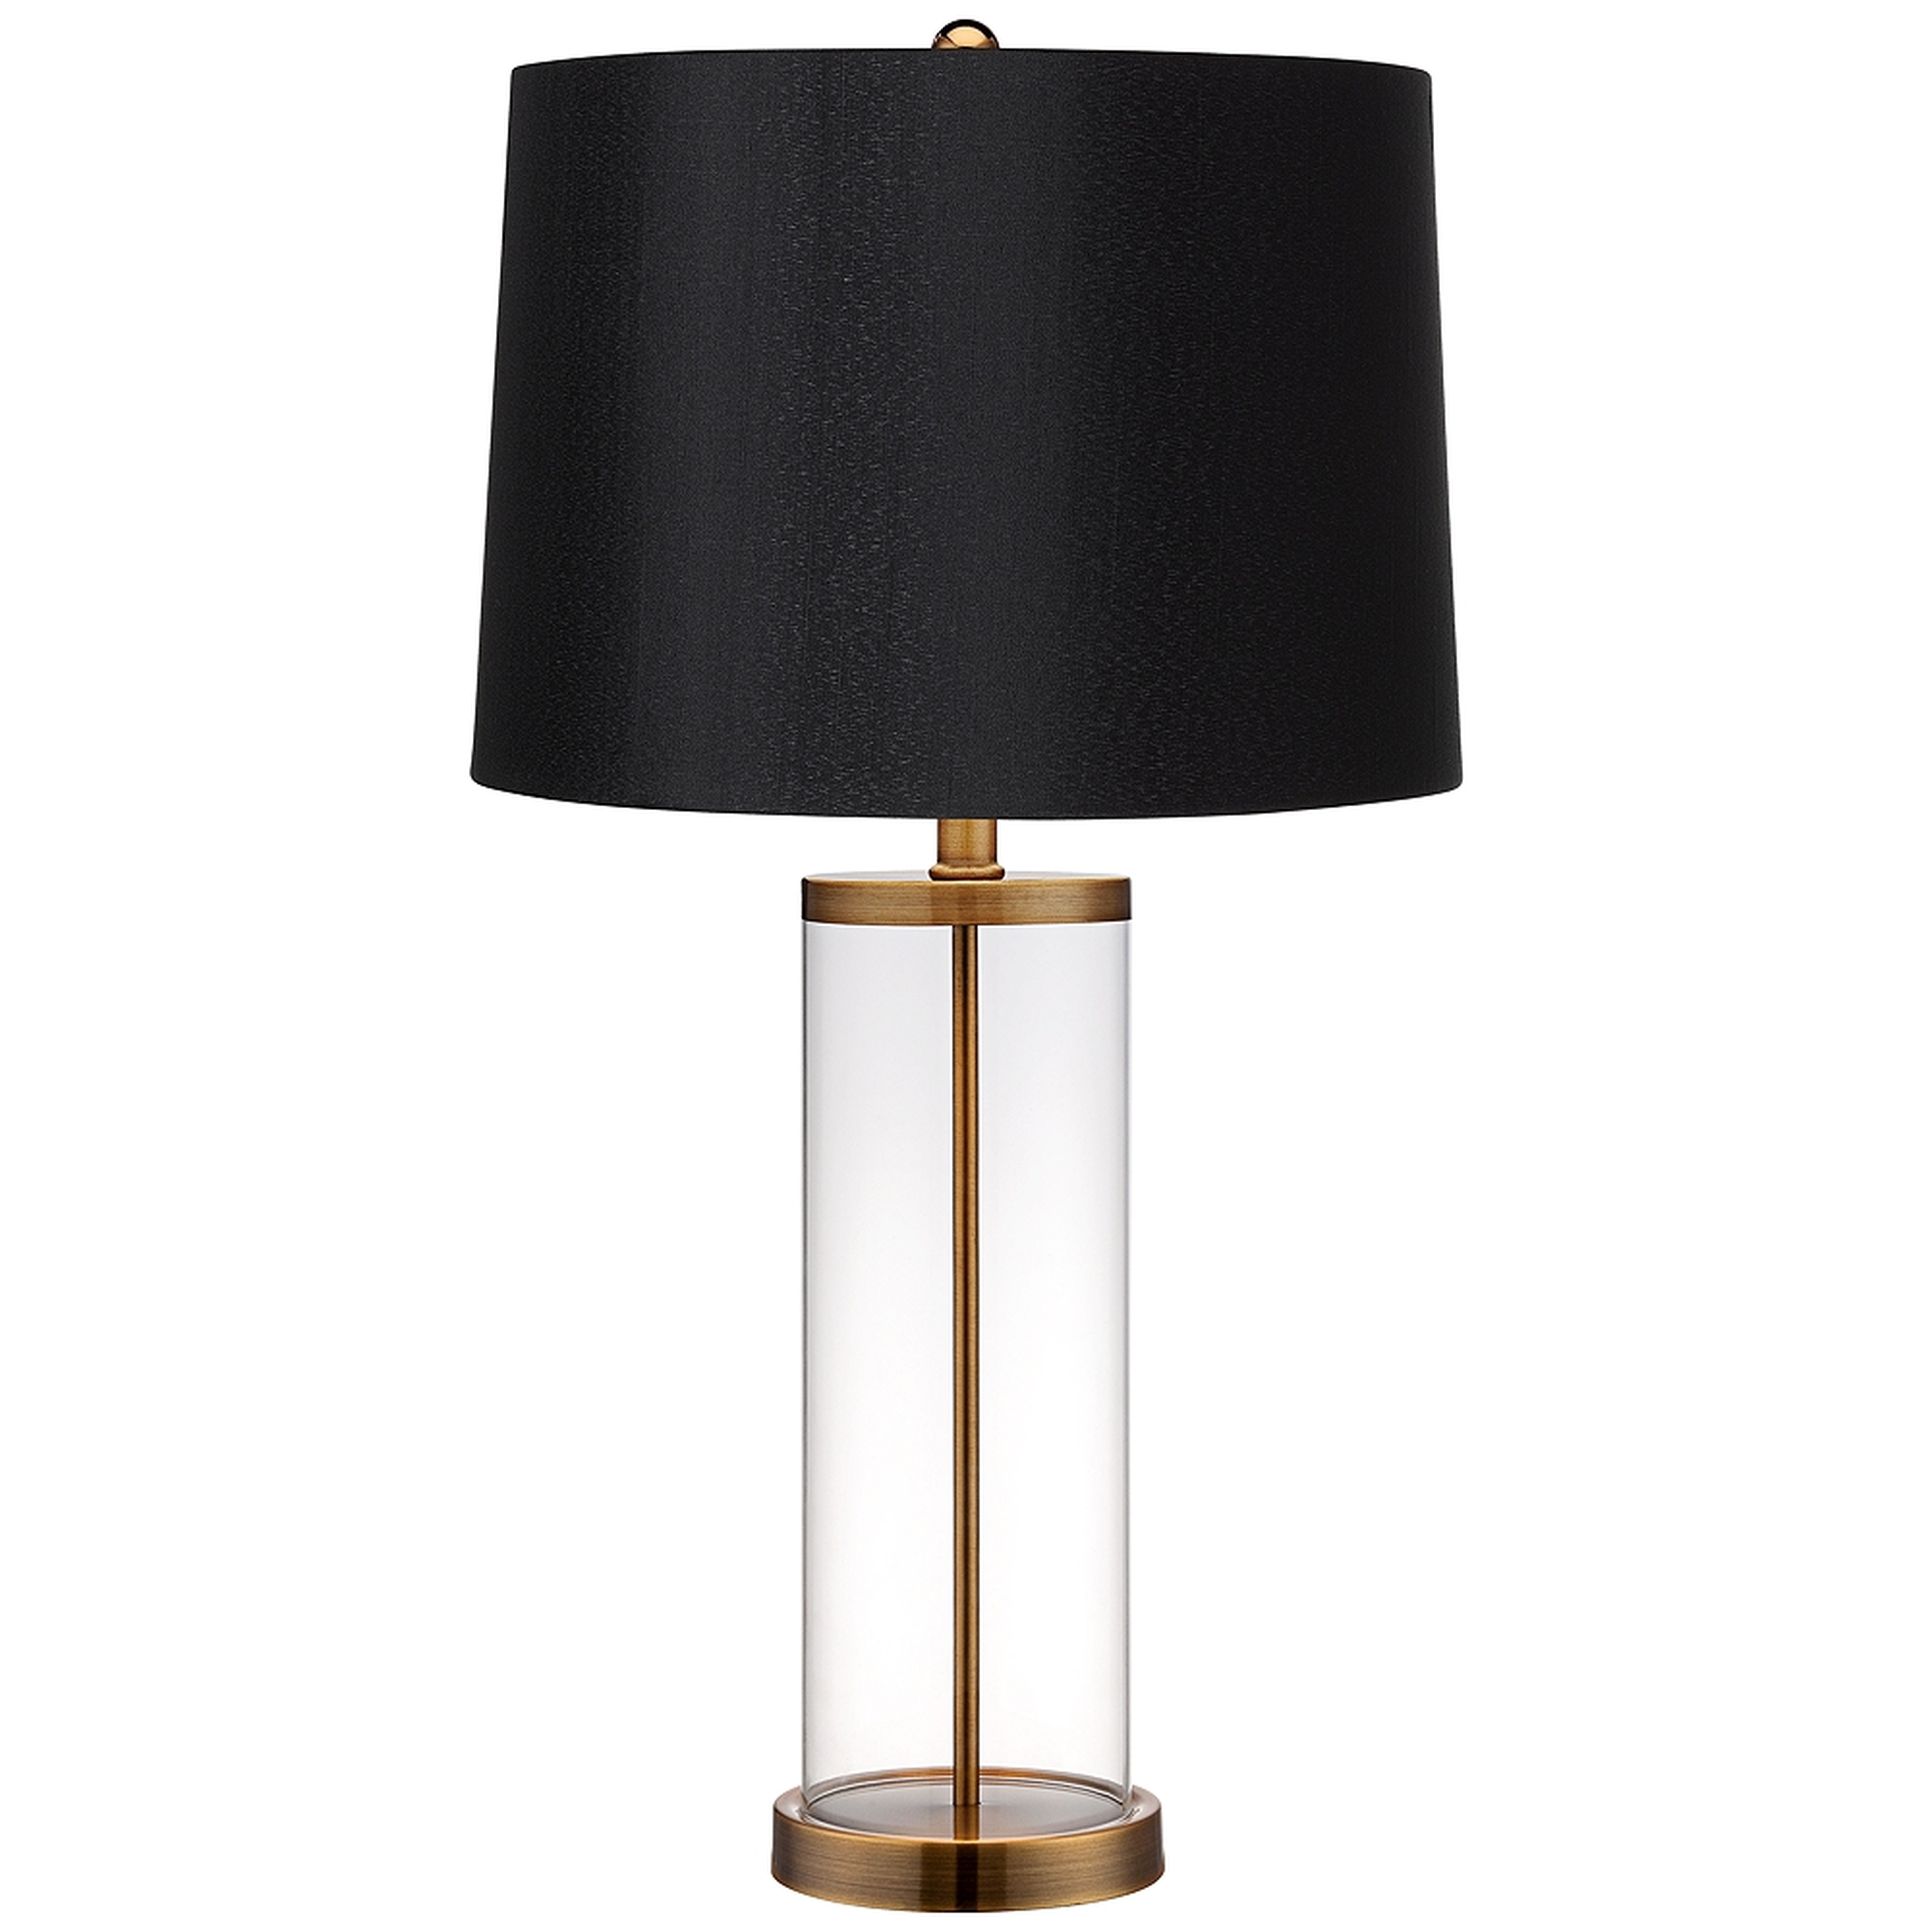 Glass and Gold Cylinder Fillable Table Lamp with Black Shade - Style # 91T48 - Lamps Plus